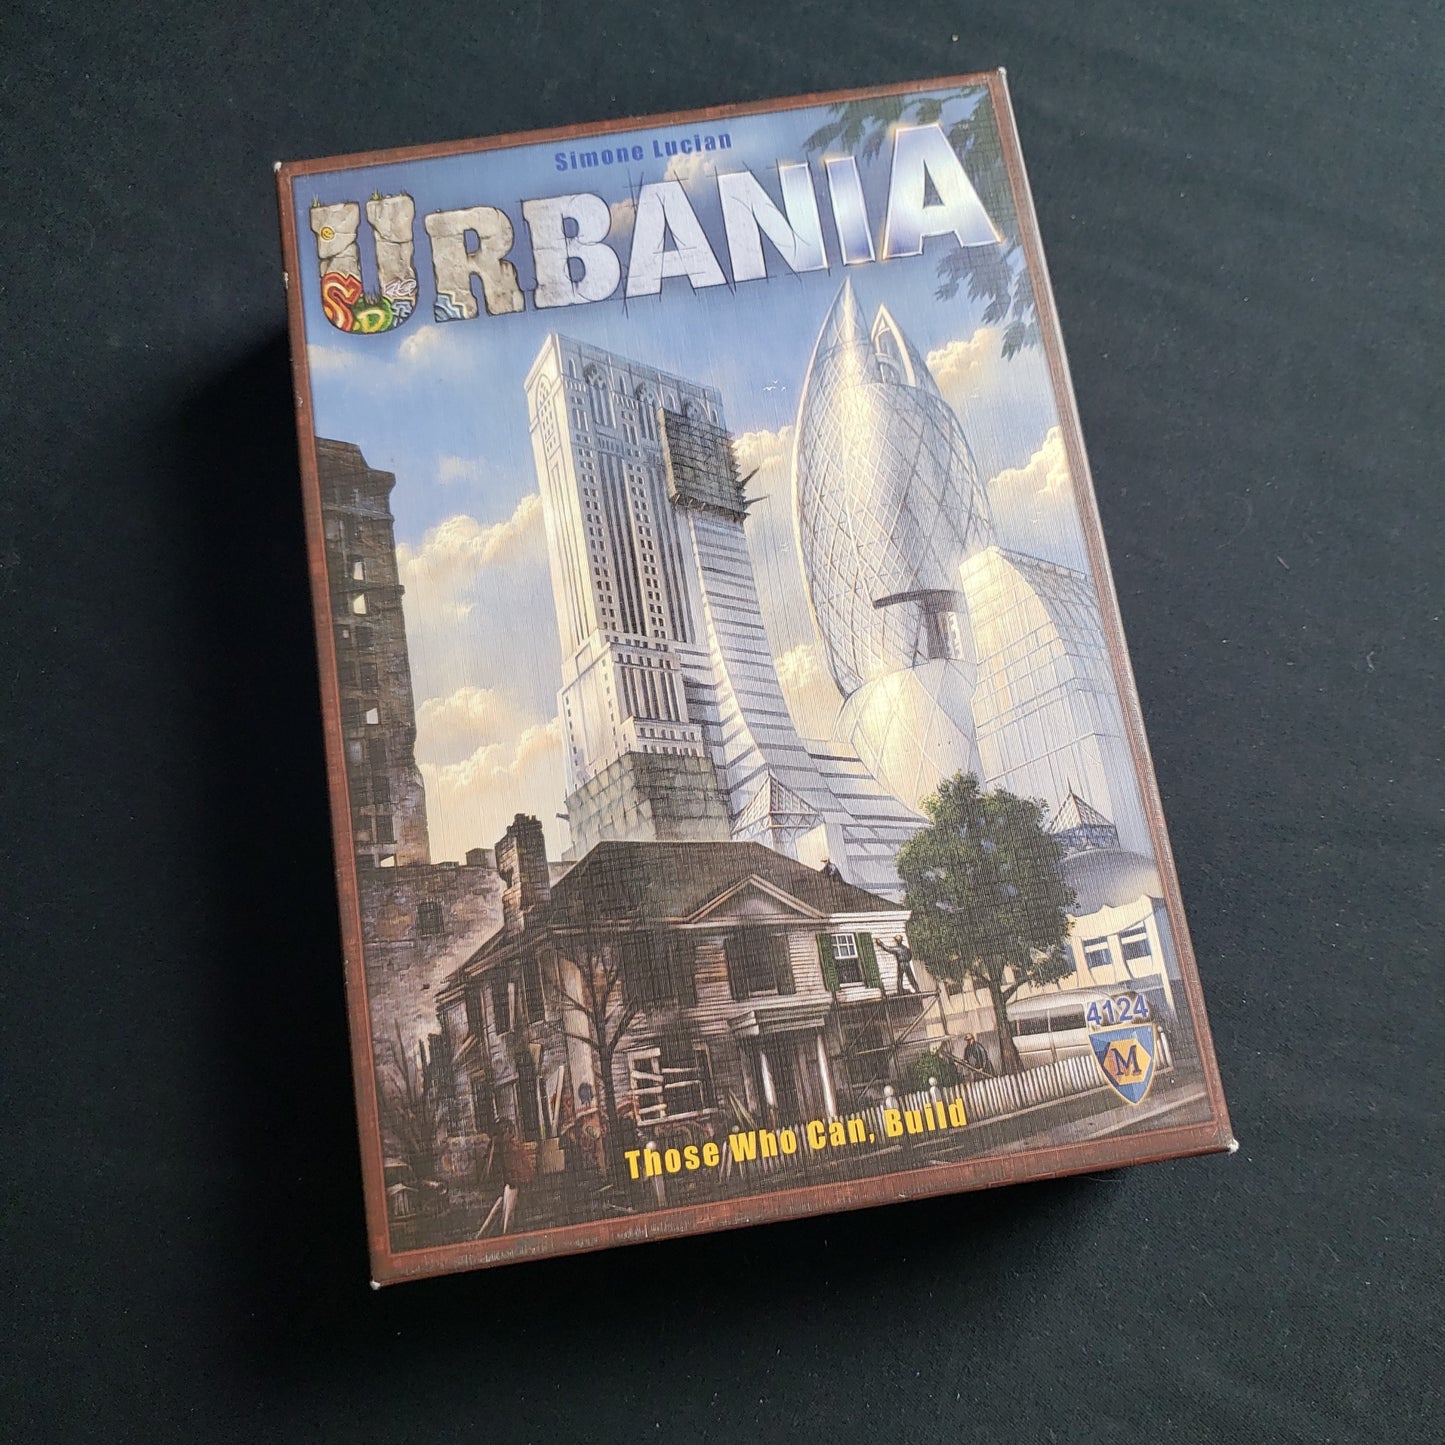 Image shows the front cover of the box of the Urbania board game